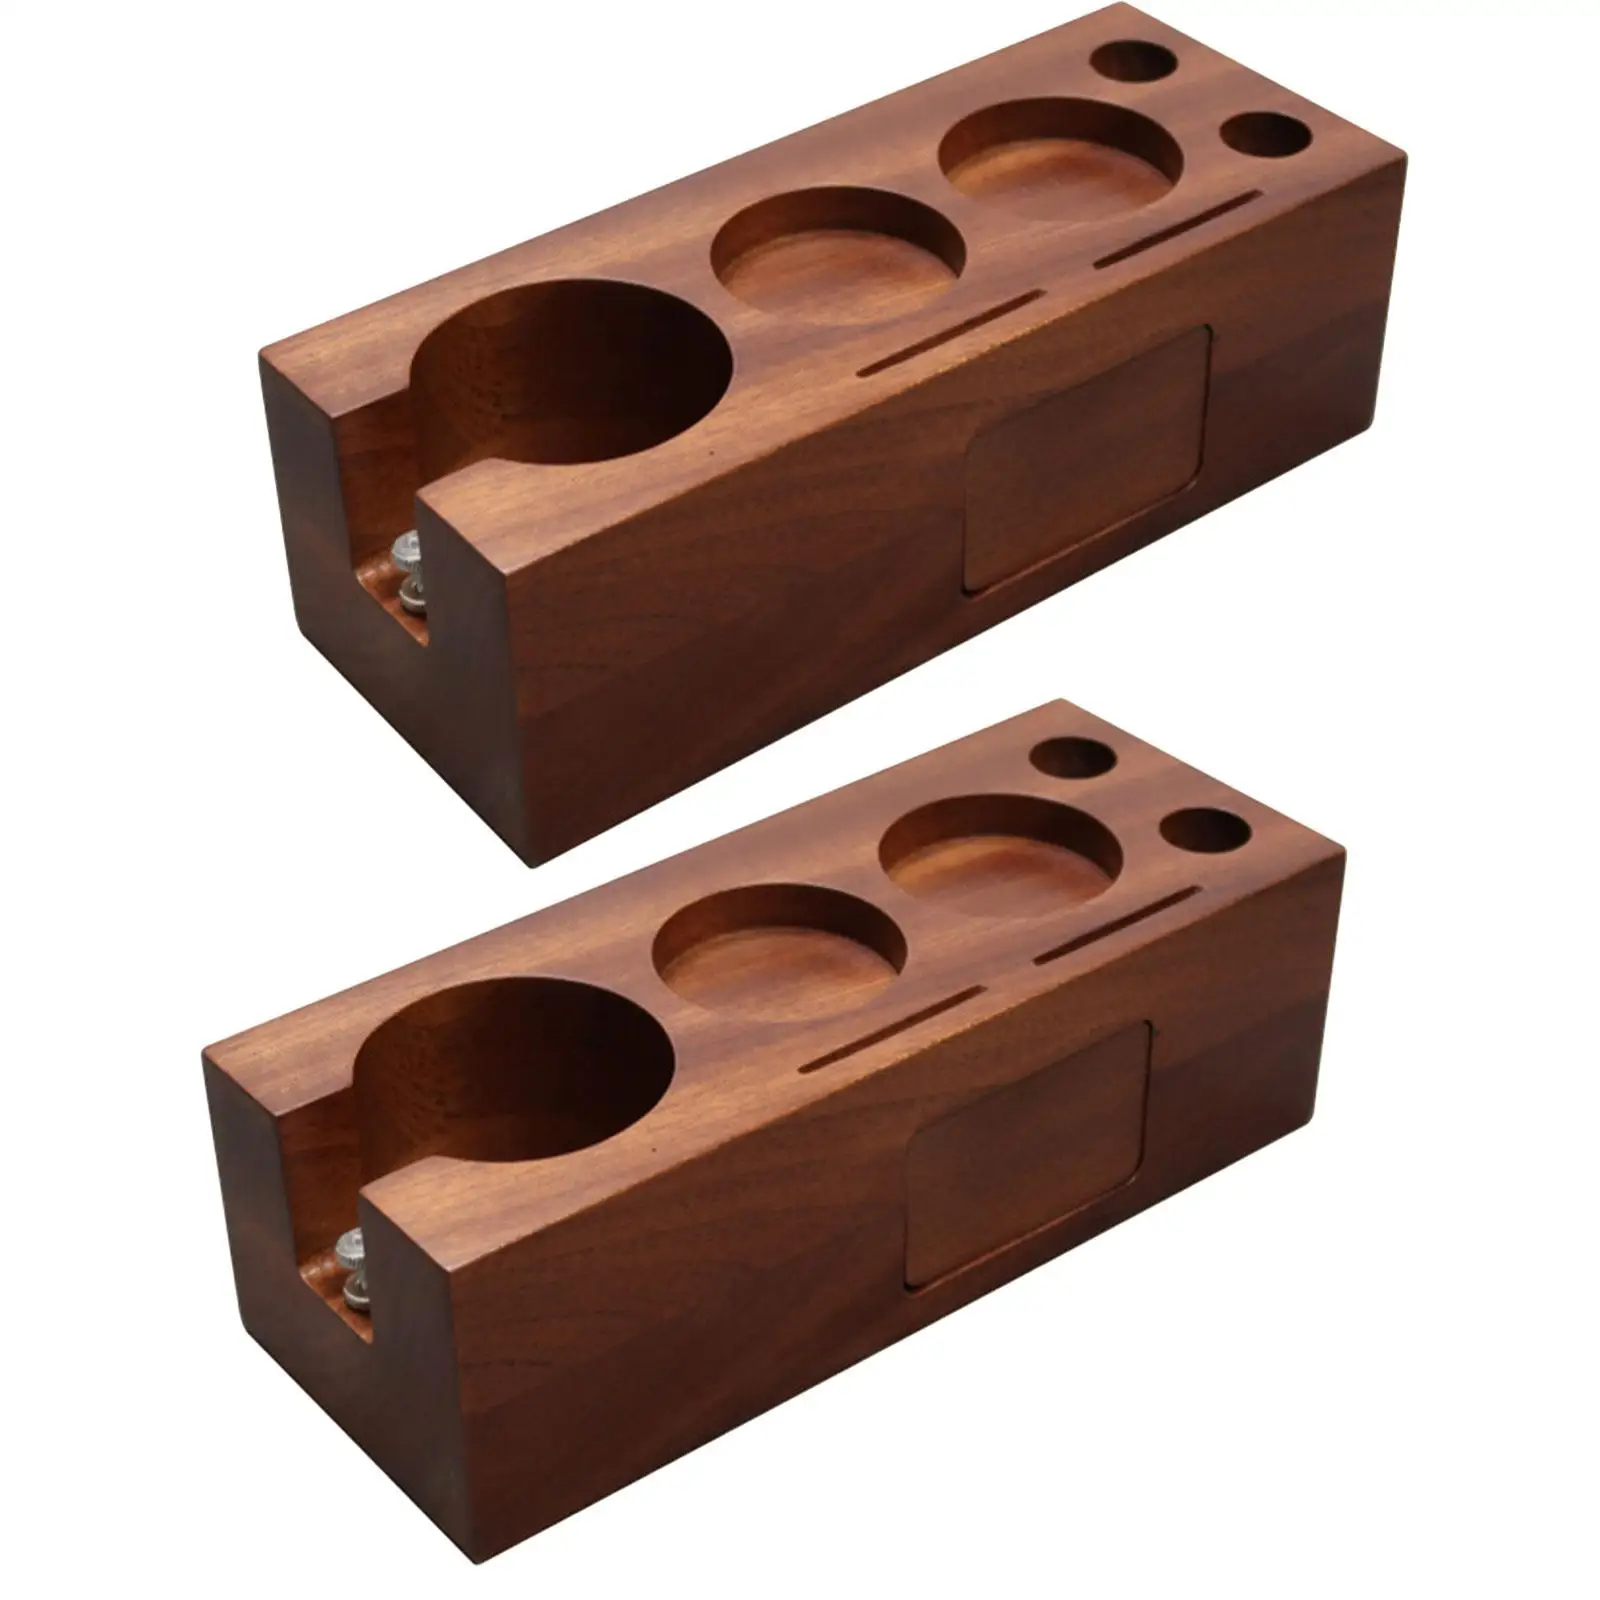 Wood Manual Station Accessories 3 Holes Espresso Tamper Mat Stand